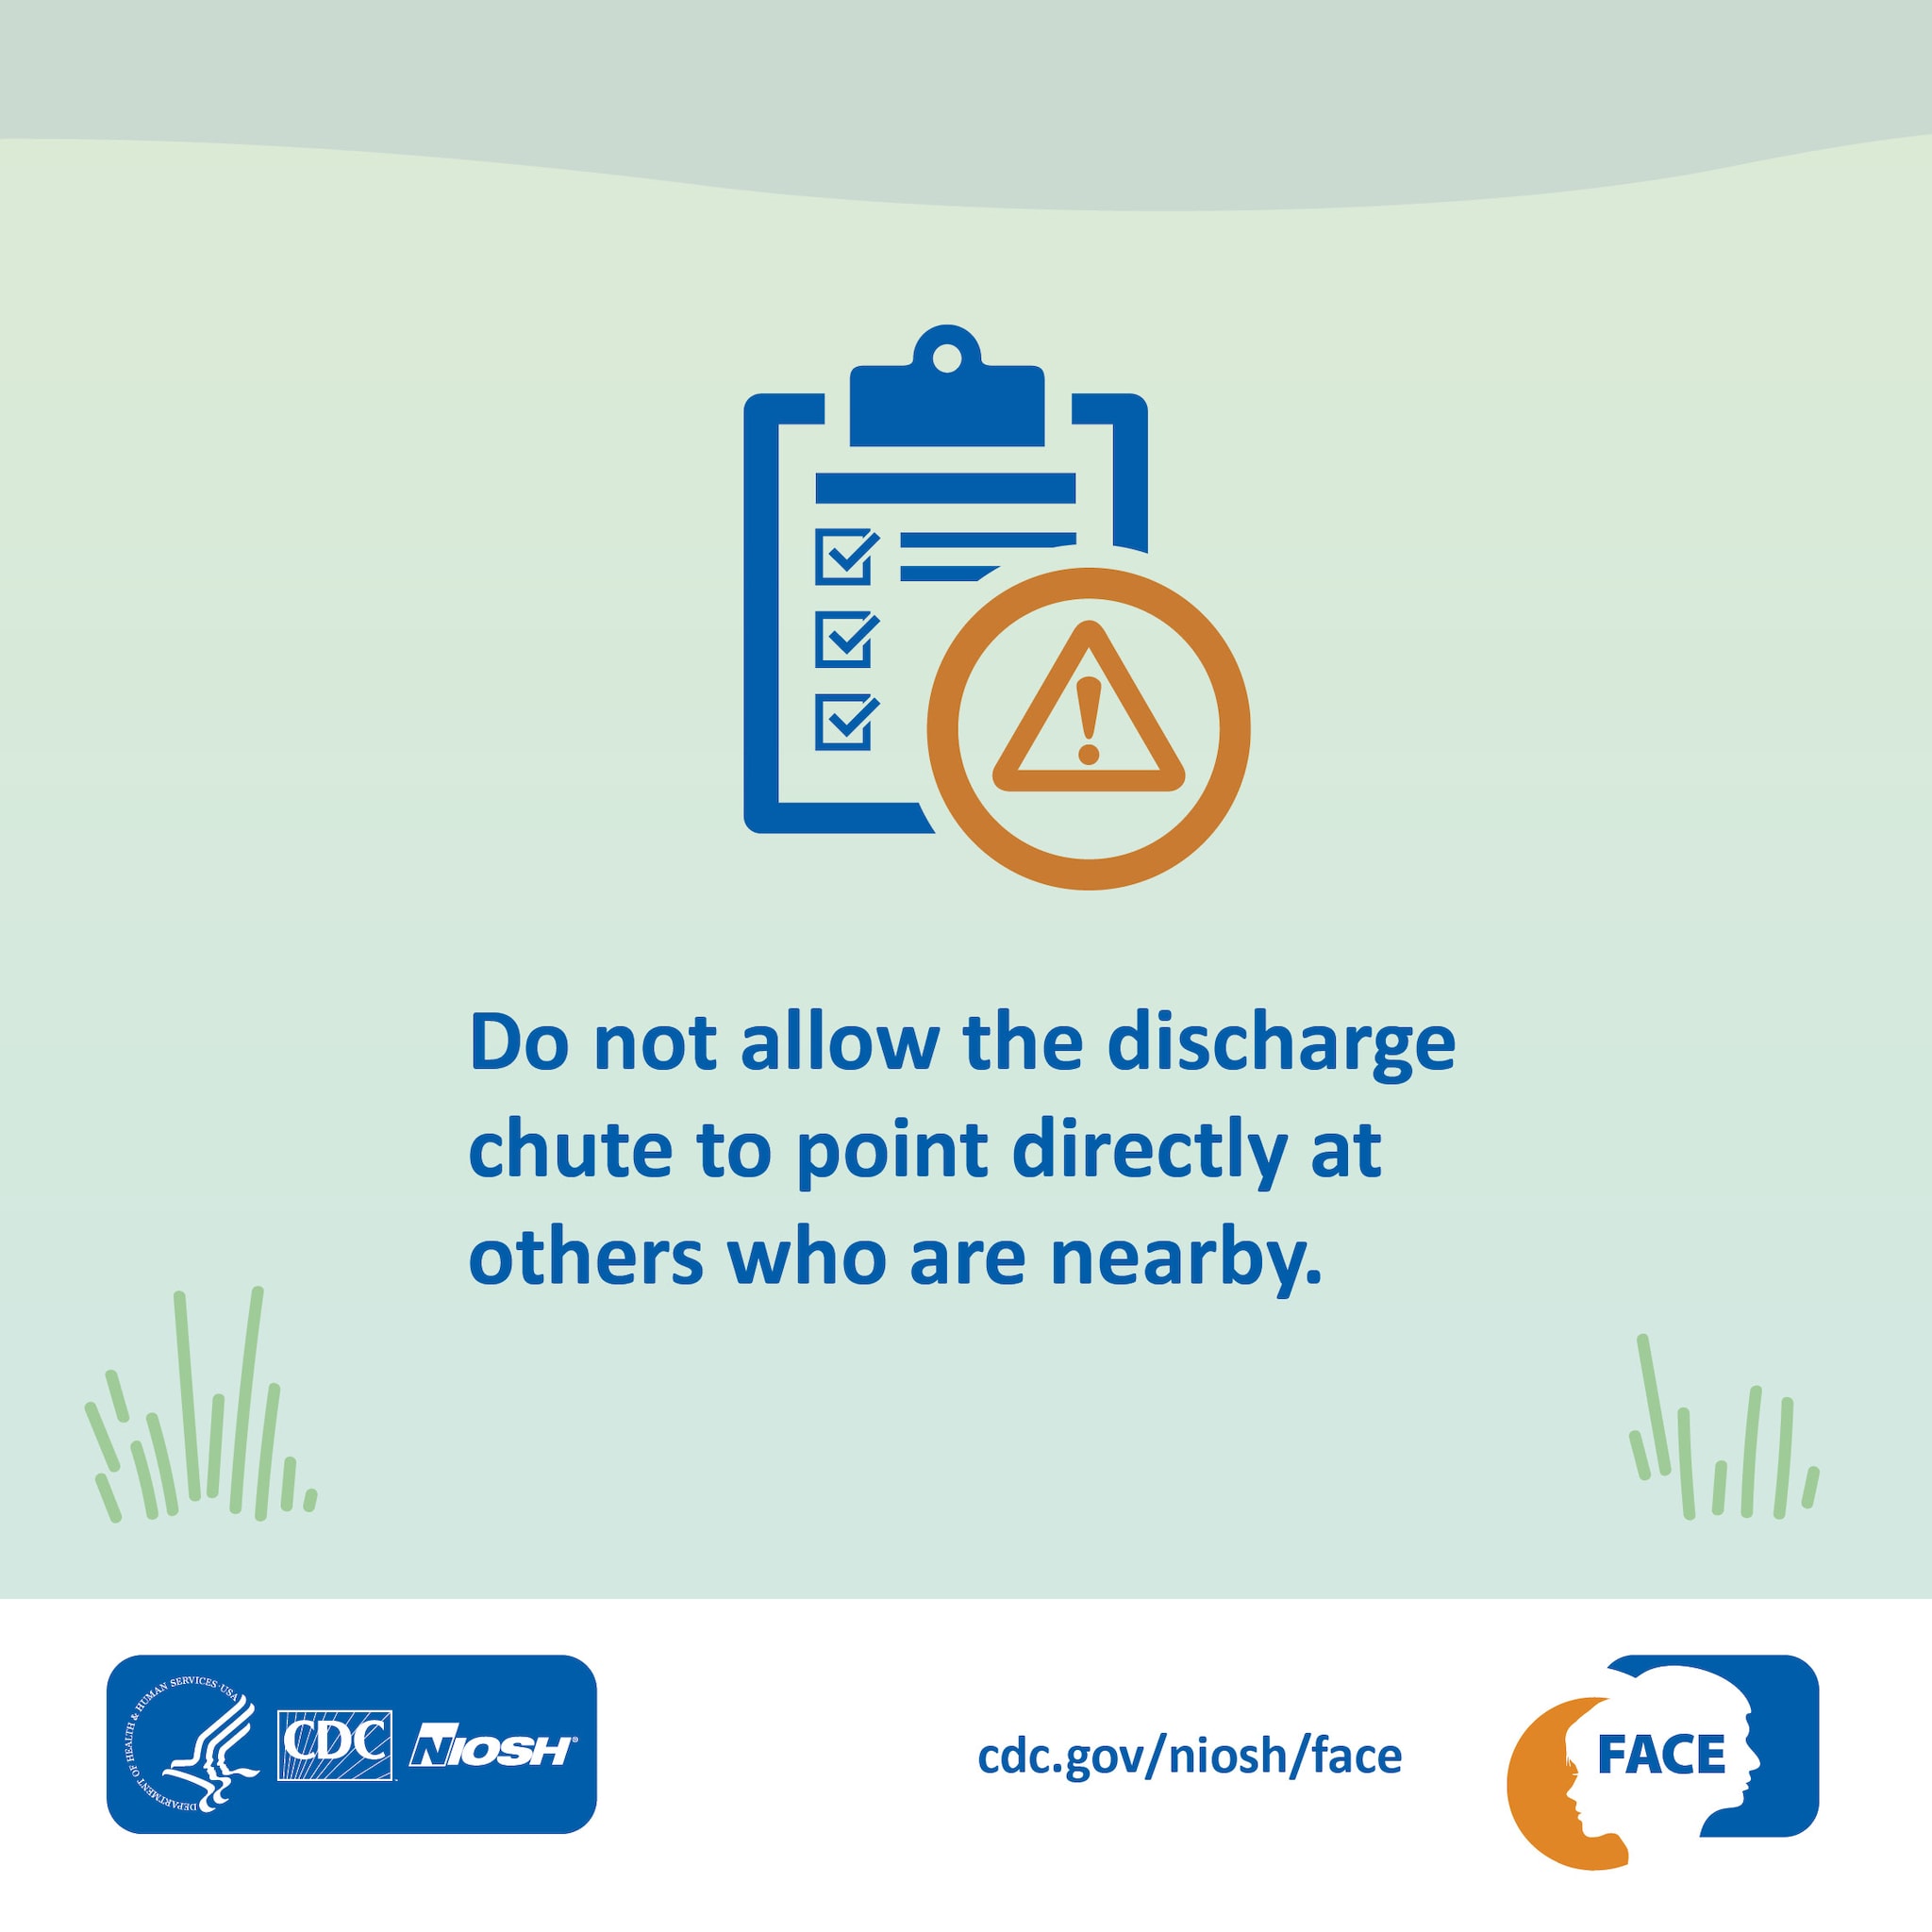 Do not allow the discharge chute to point directly at others who are nearby.